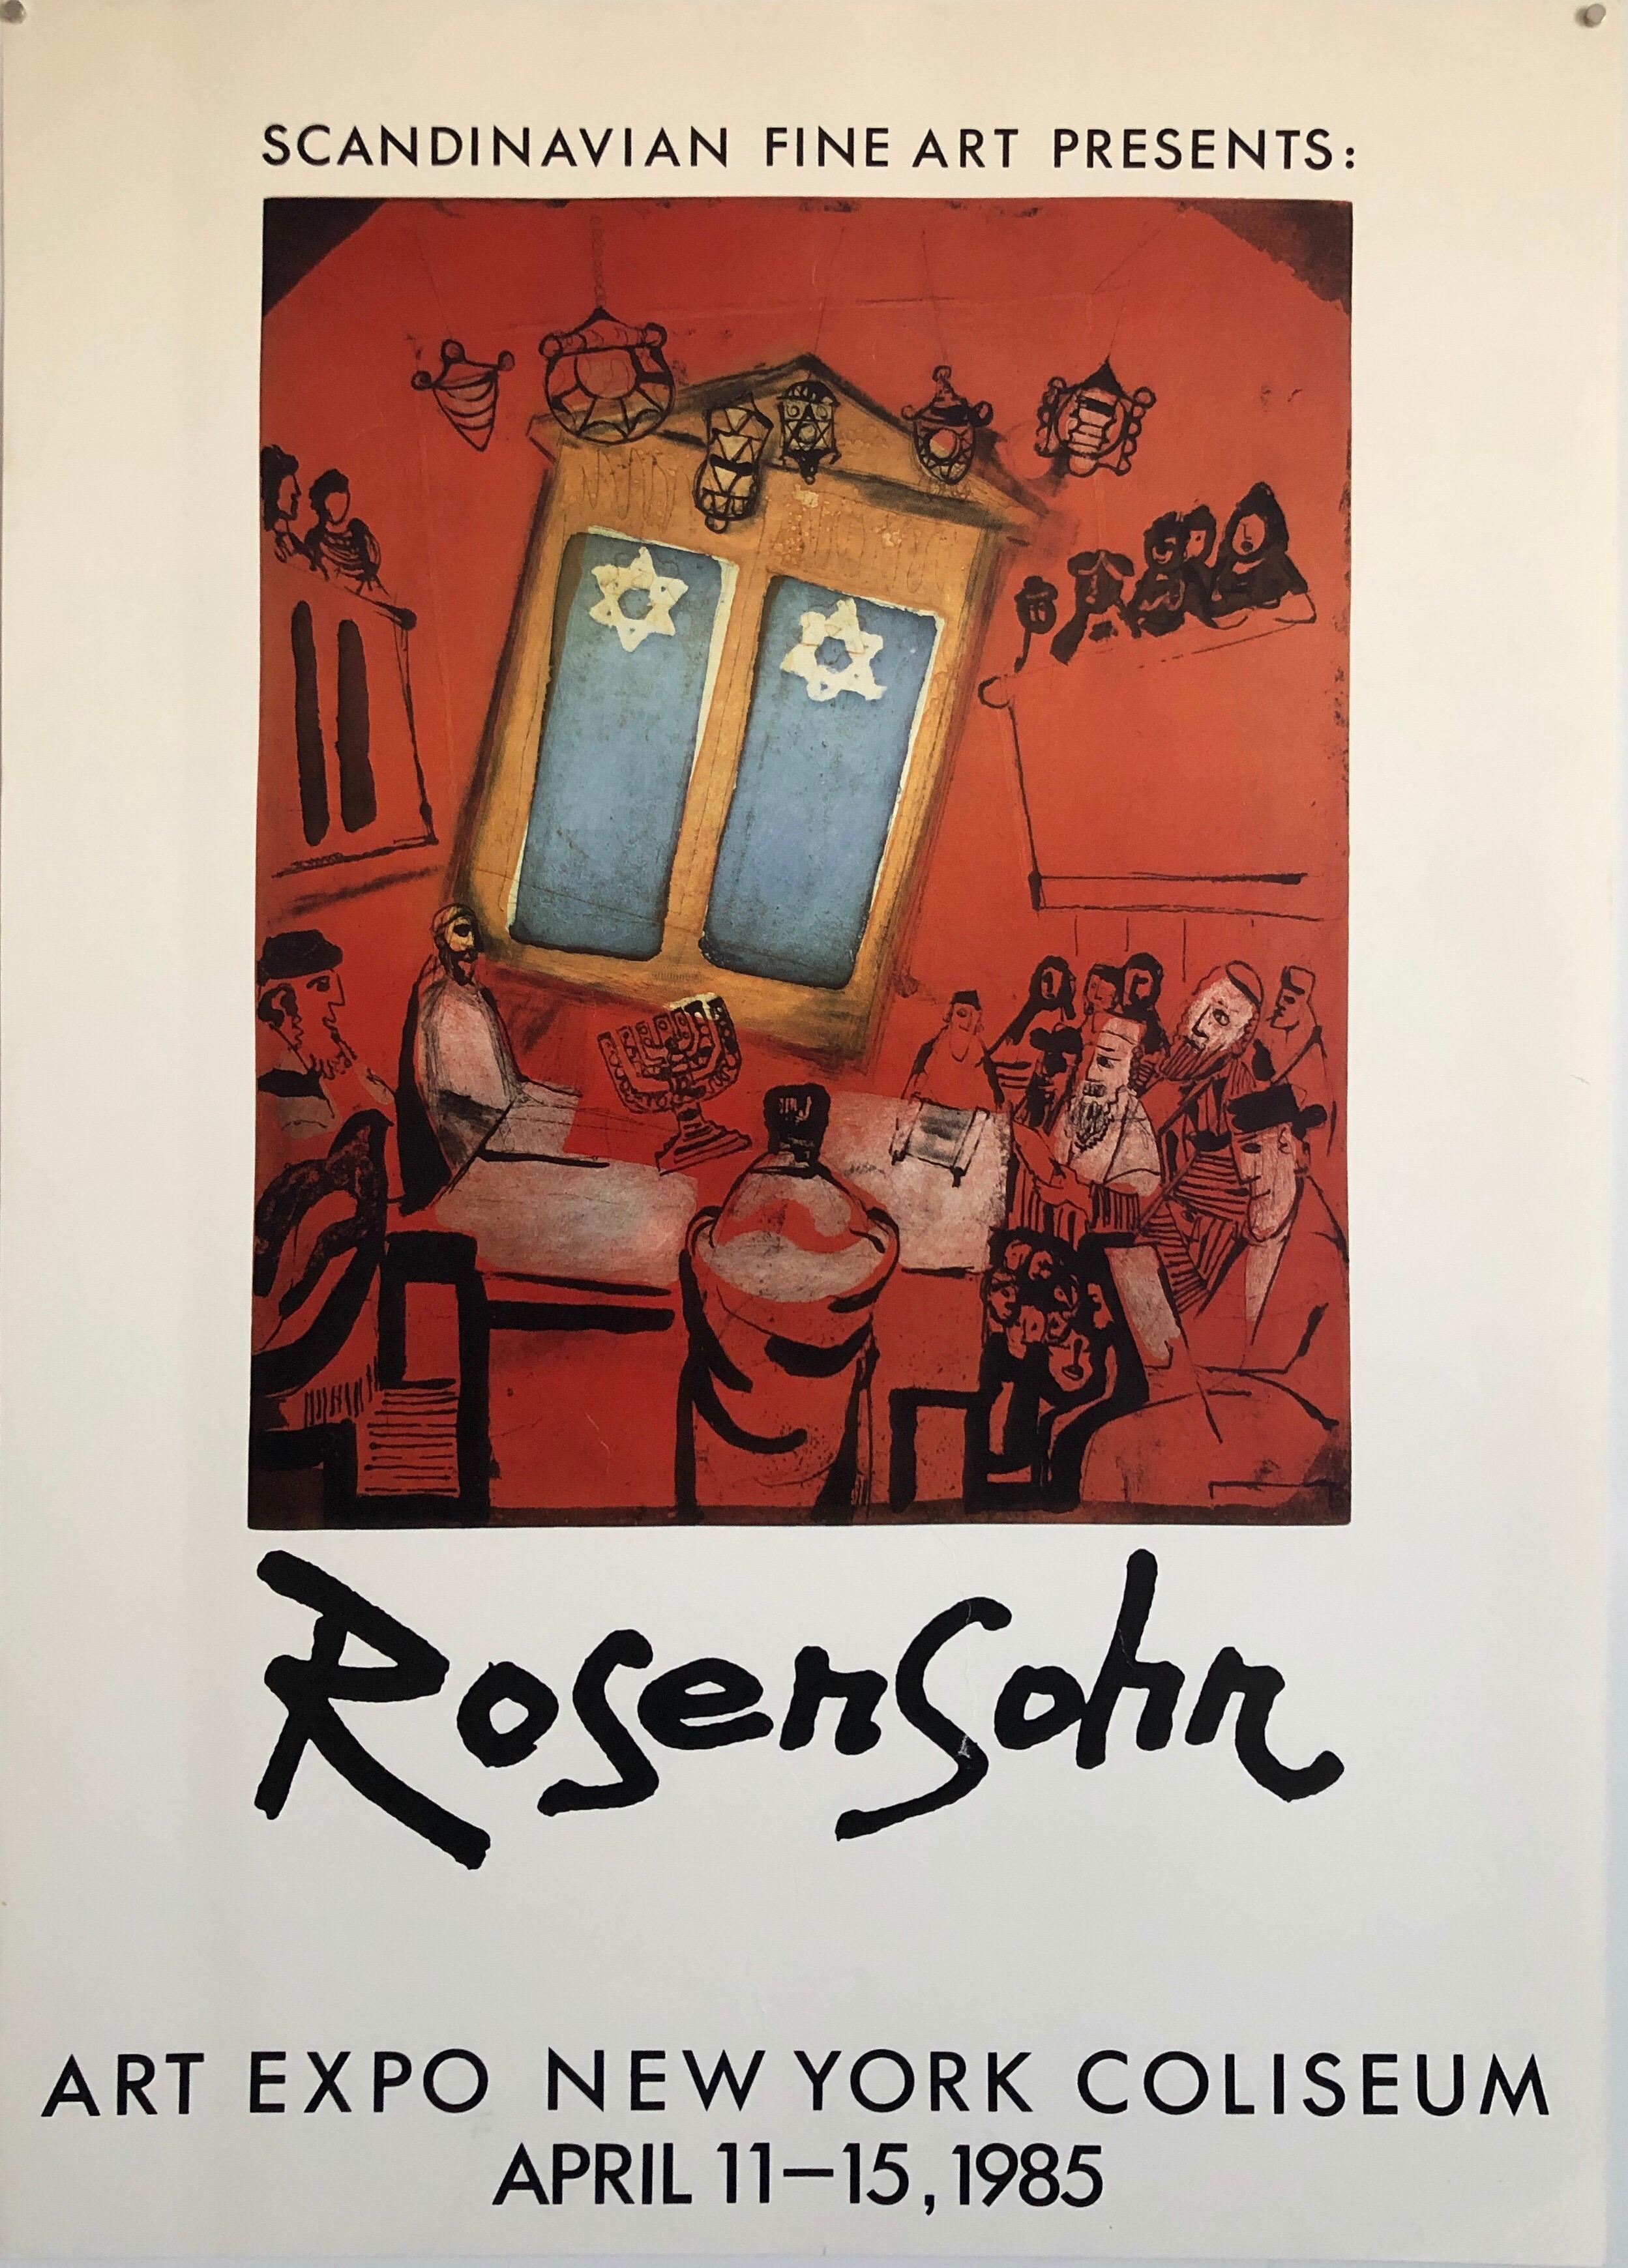 on Hahnemuhle paper, hand signed and numbered. poster is not included.
These depict synagogue interiors, Rabbis at prayer etc. Judaic religious events.
Mauritz Lennart Rosensohn , born July 25, 1918 in Malmö, Denmark, died in 1994, was a Swedish